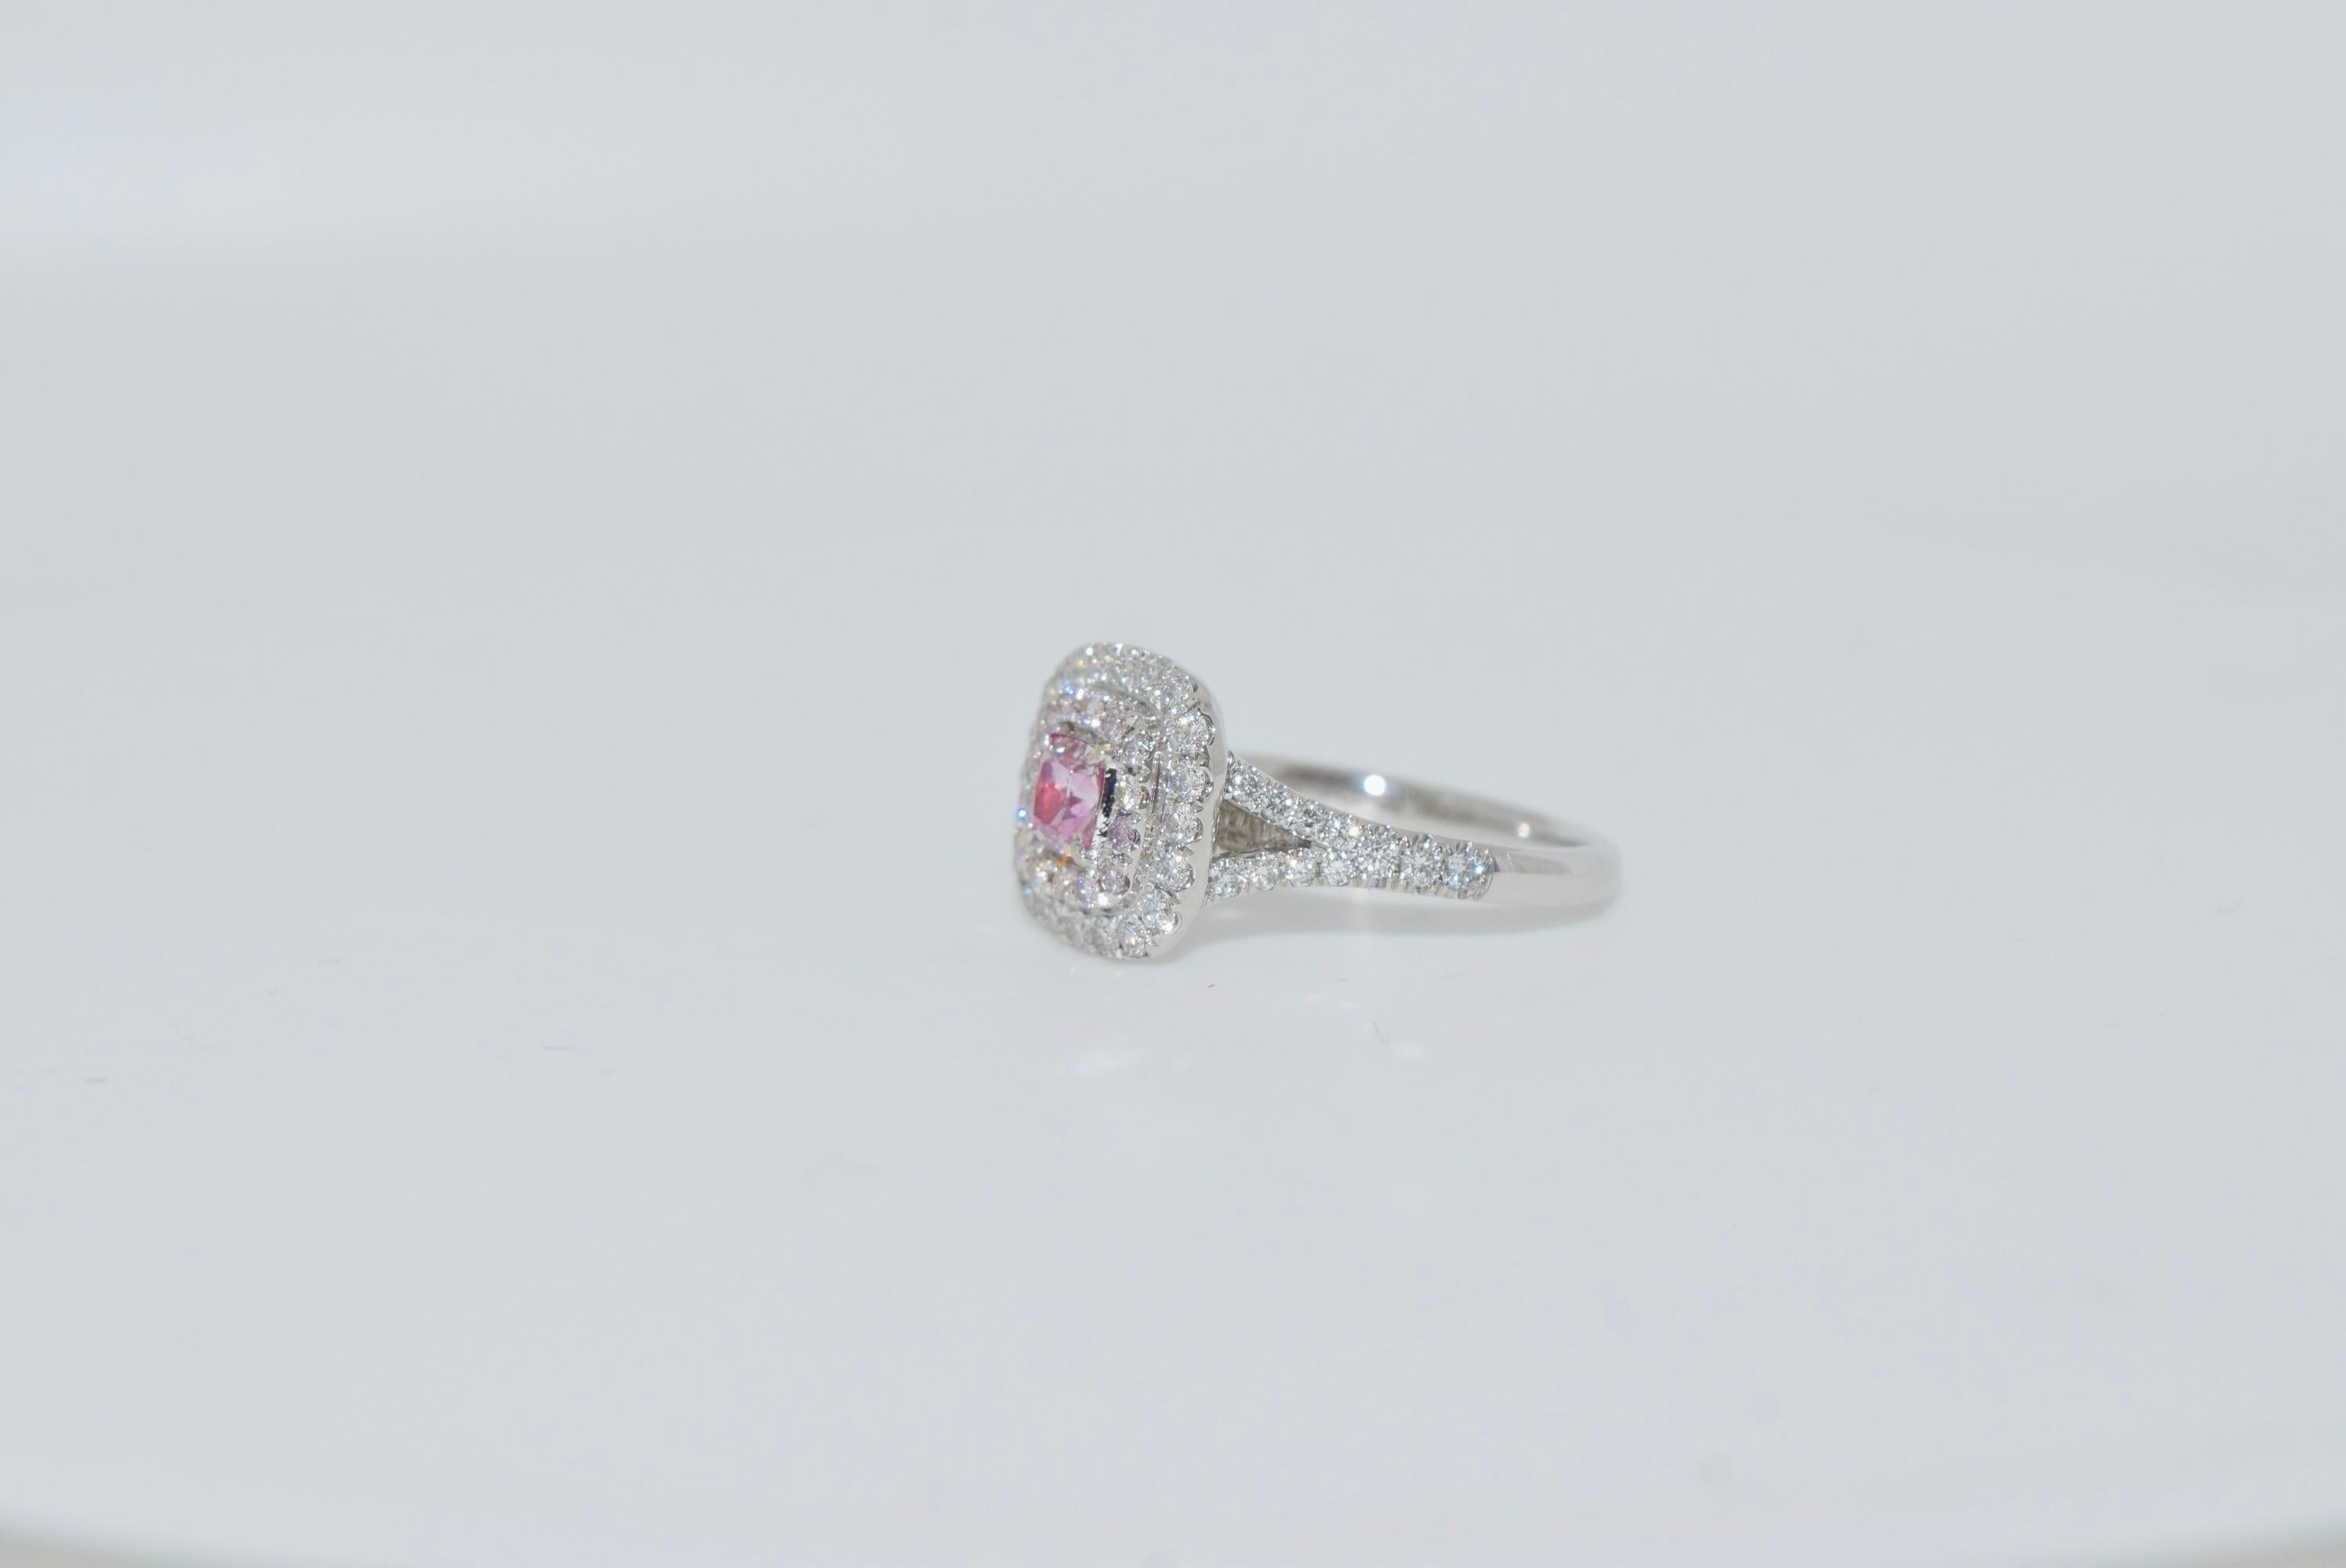 GIA Certified 0.40 Carat Faint Pink Diamond Ring SI1 Clarity For Sale 1